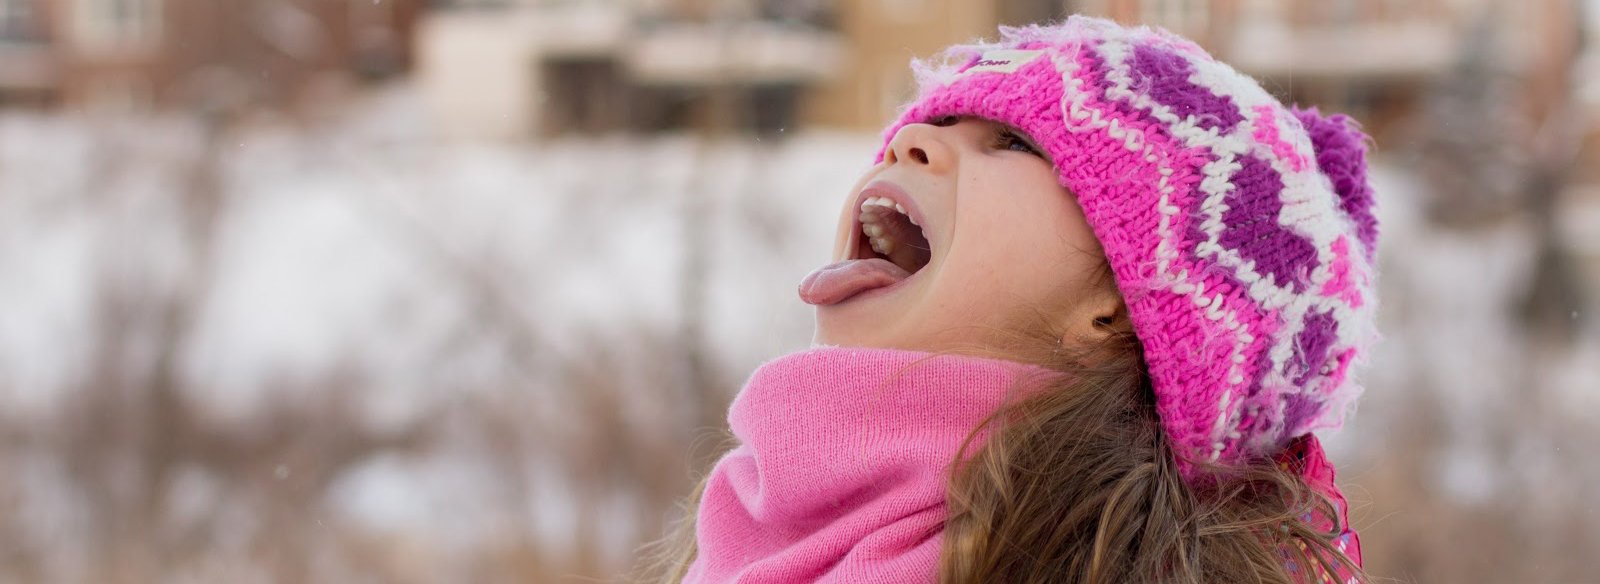 a girl wearing a pink hat catching snowflakes